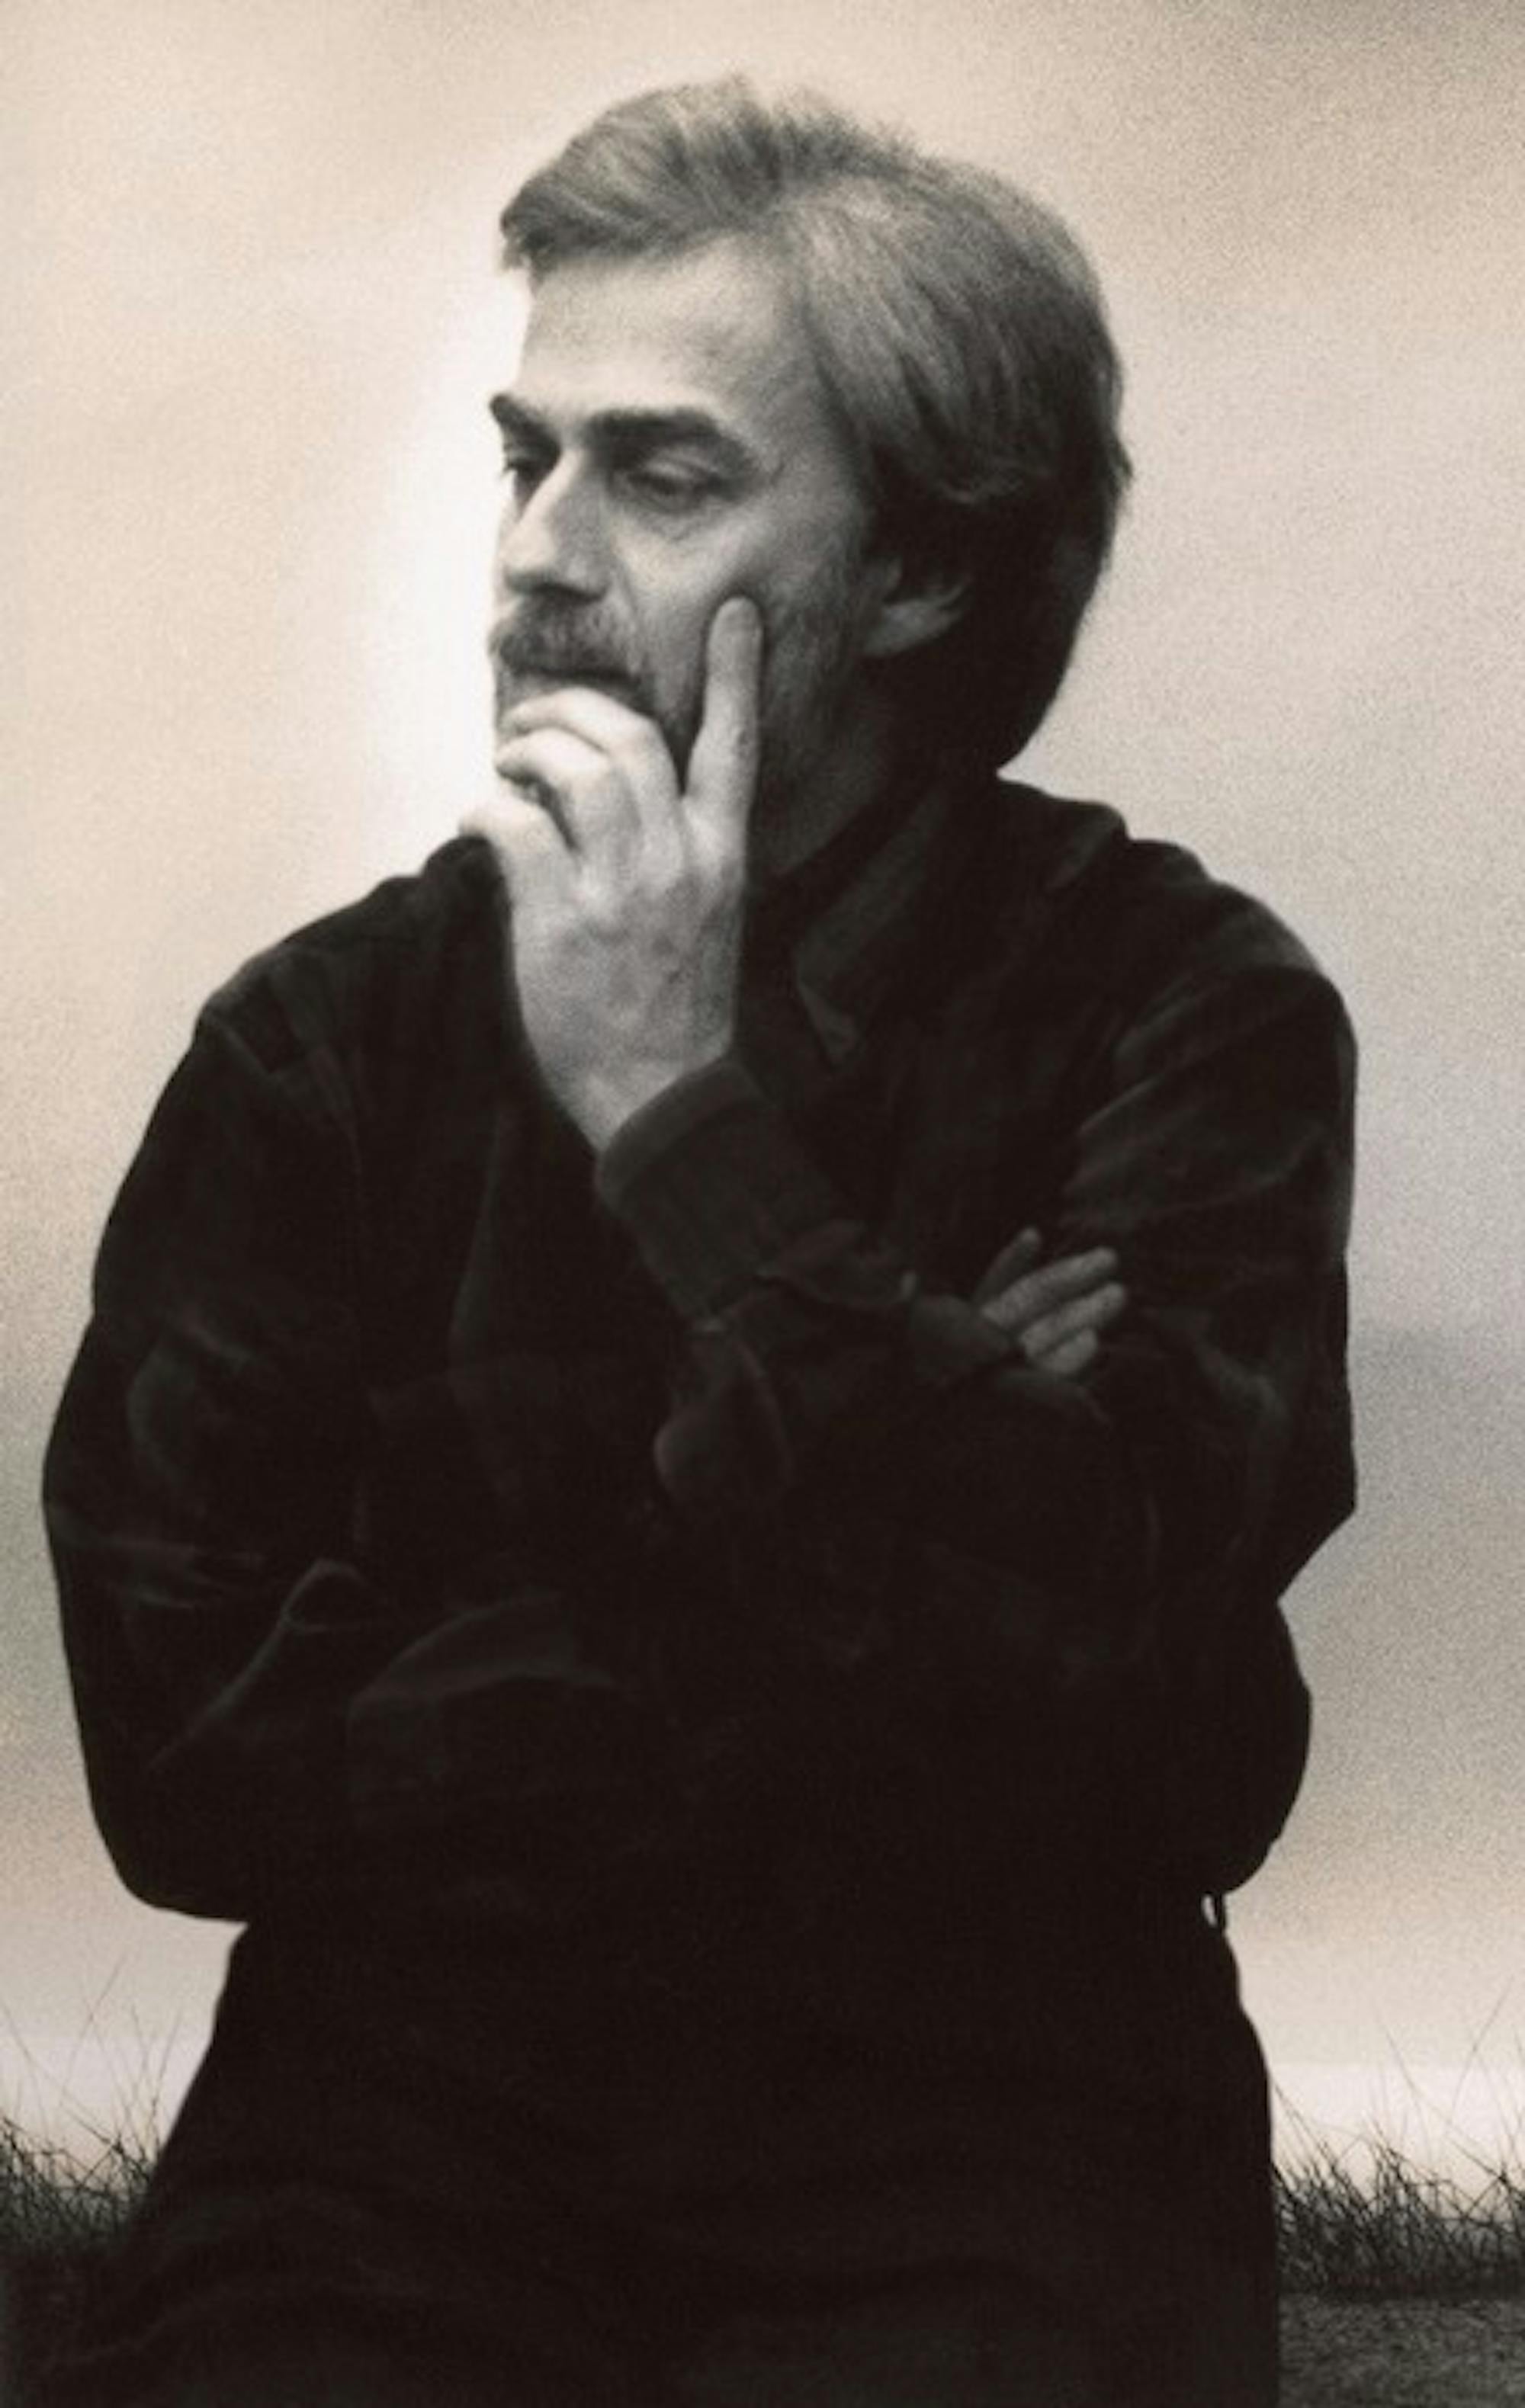 Pianist Krystian Zimerman will play two Beethoven sonatas and two Chopin pieces as part of his show in Spaulding Auditorium tonight.